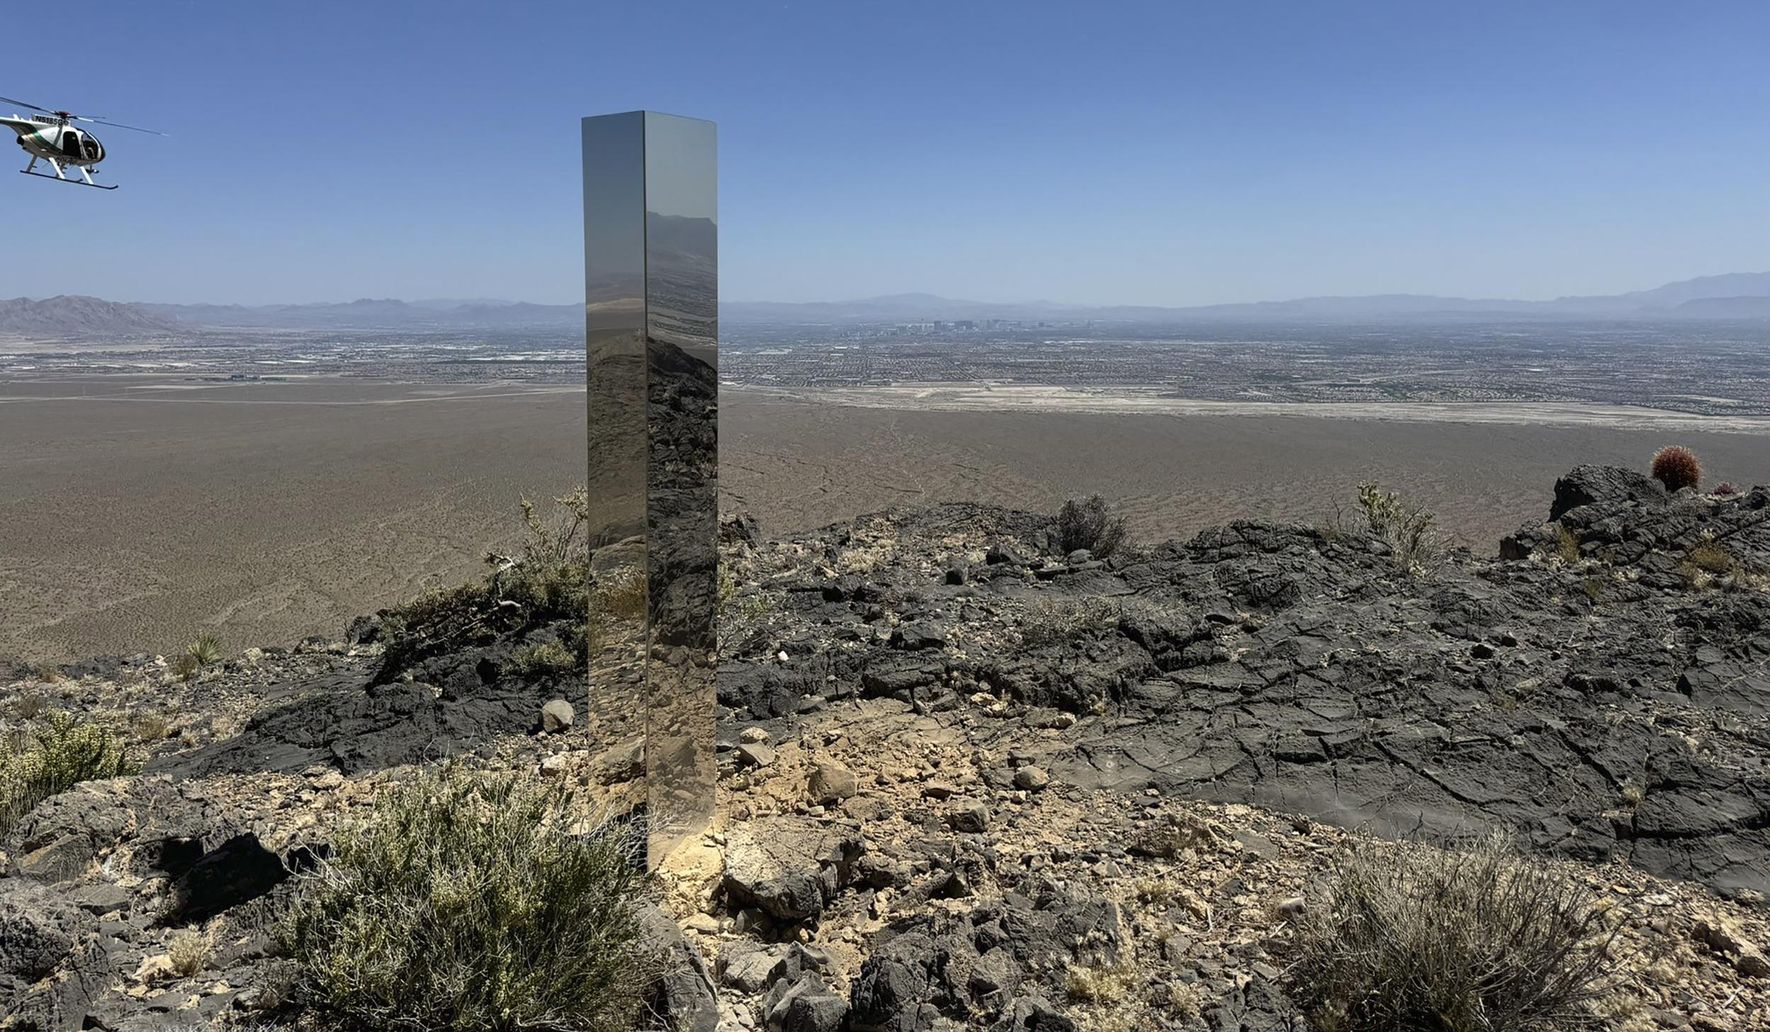 The monolith near Las Vegas that has now been removed by the police